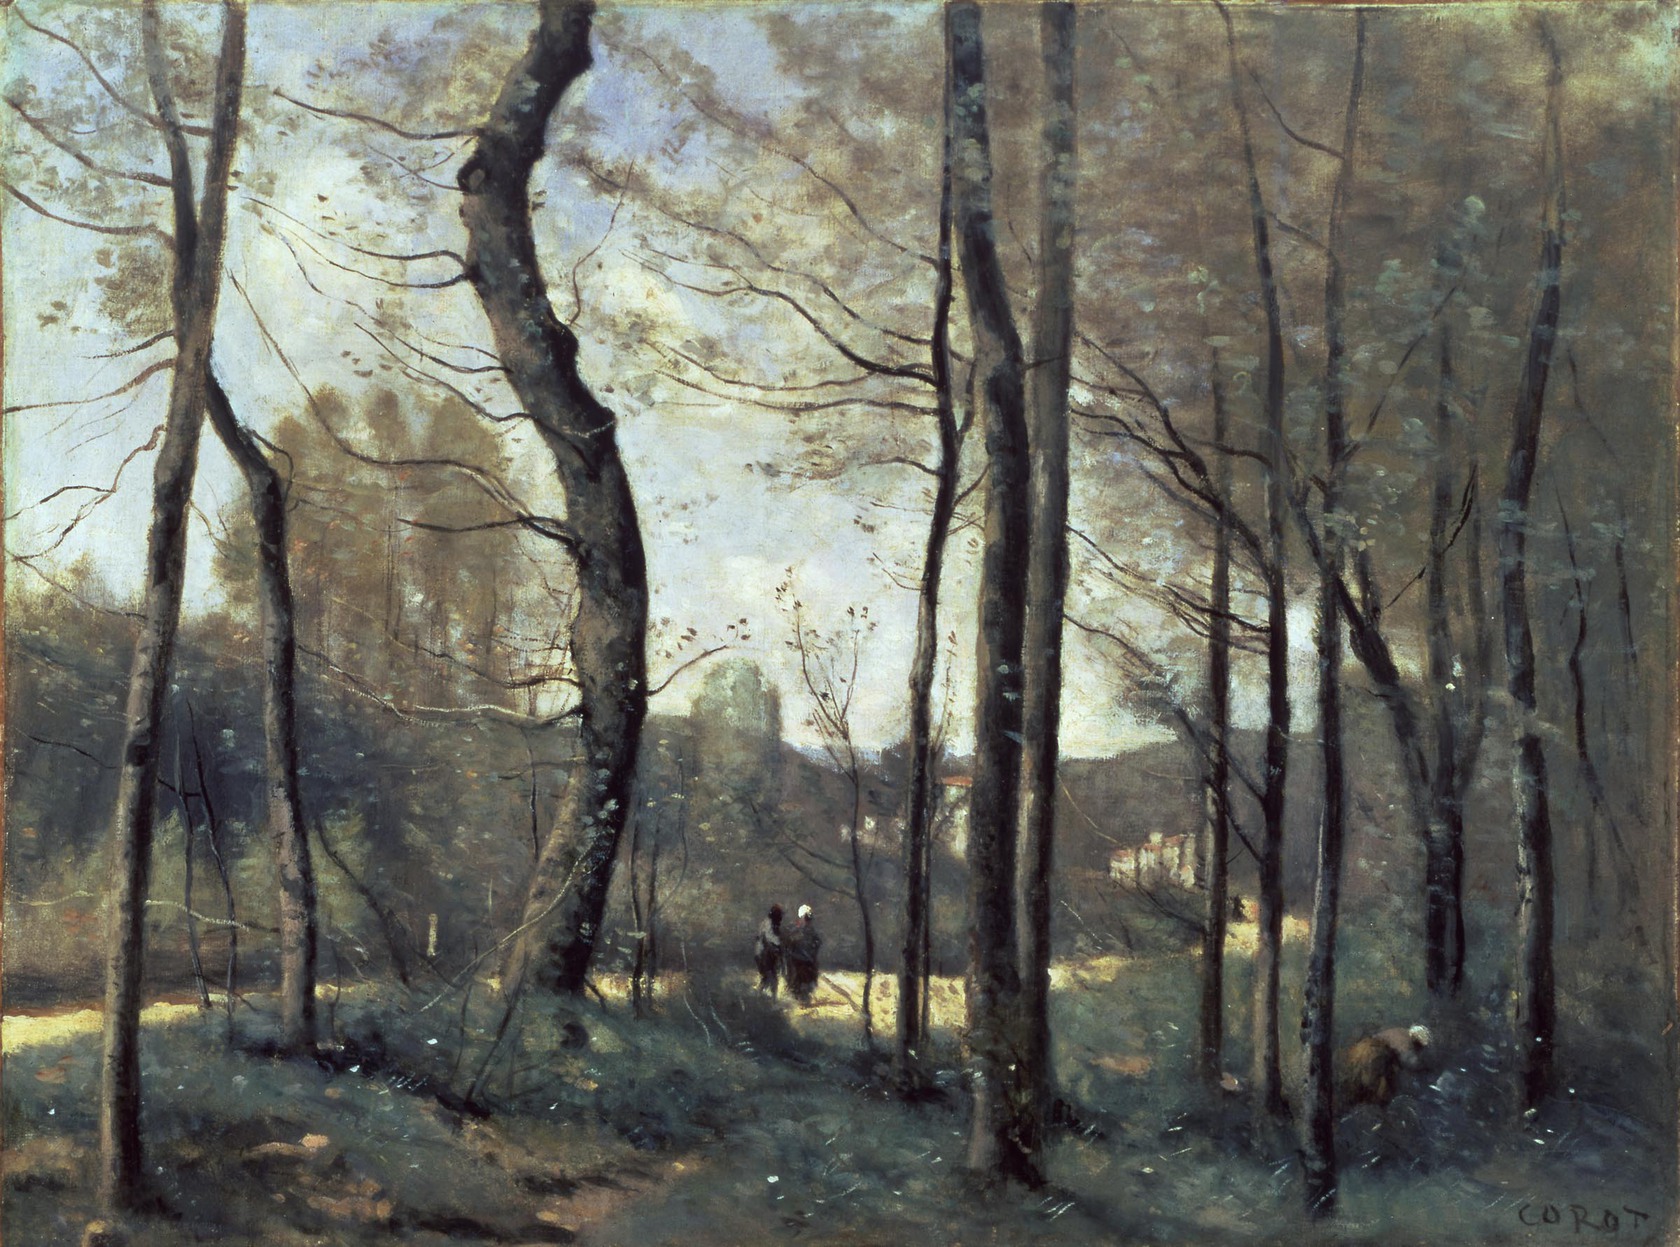 A landscape painting of a peaceful clearing.